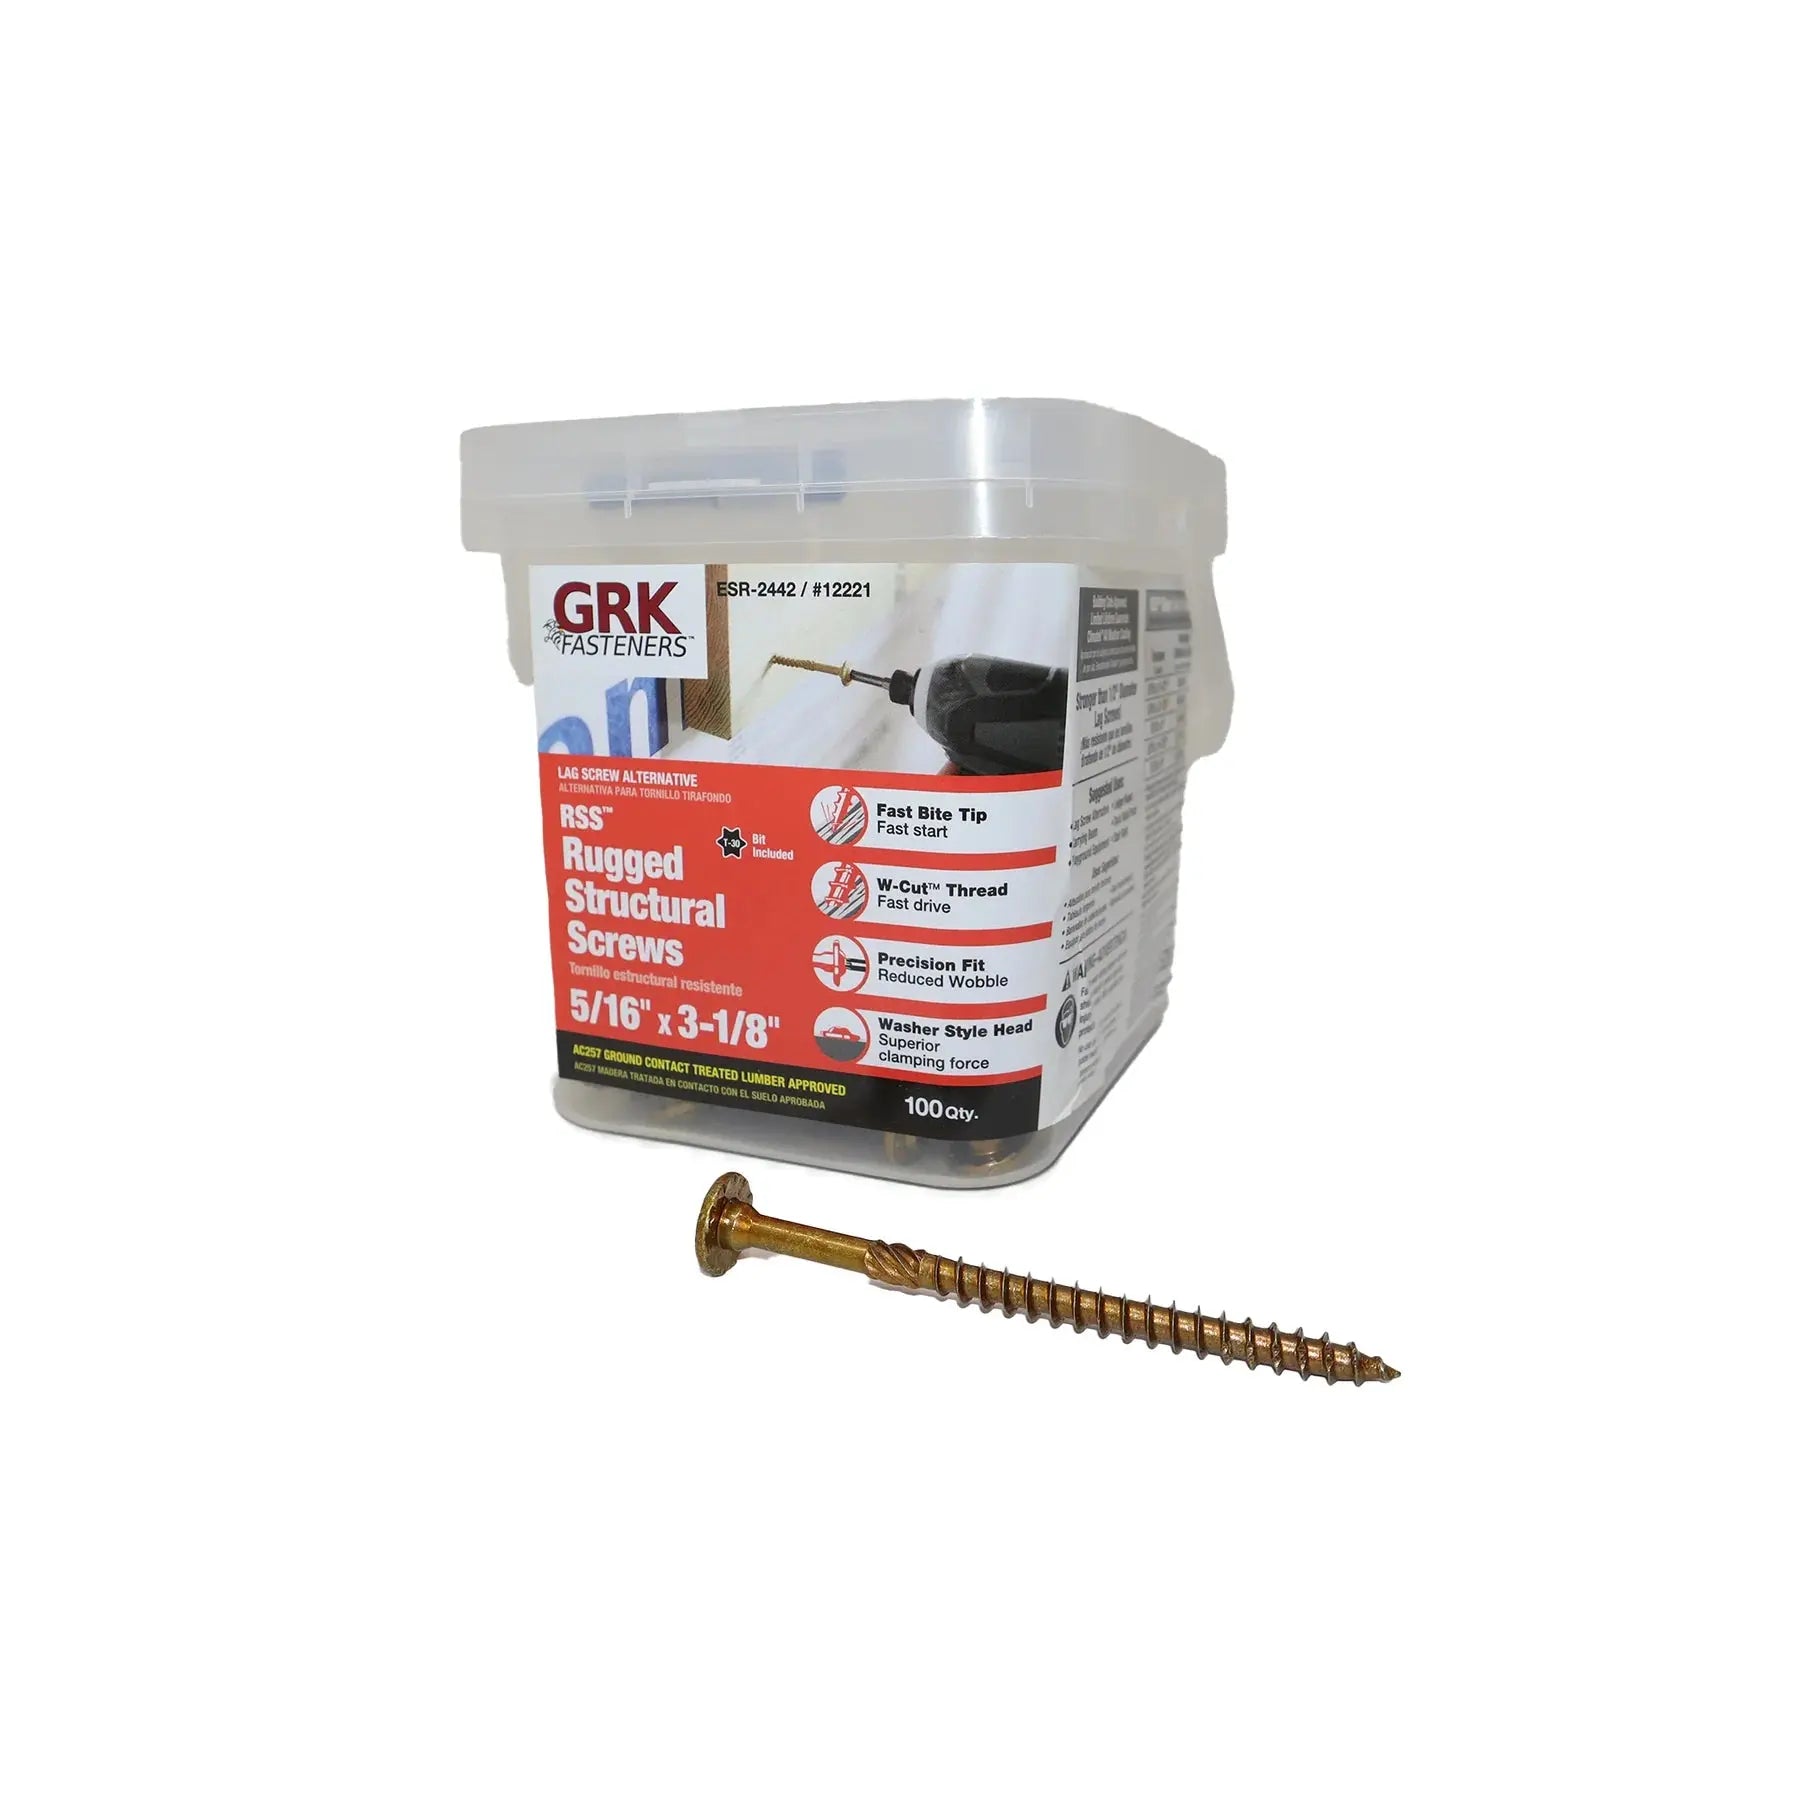 5/16" X 3-1/8" RSS SCREWS BY GRK FASTENERS - Treehouse Supplies